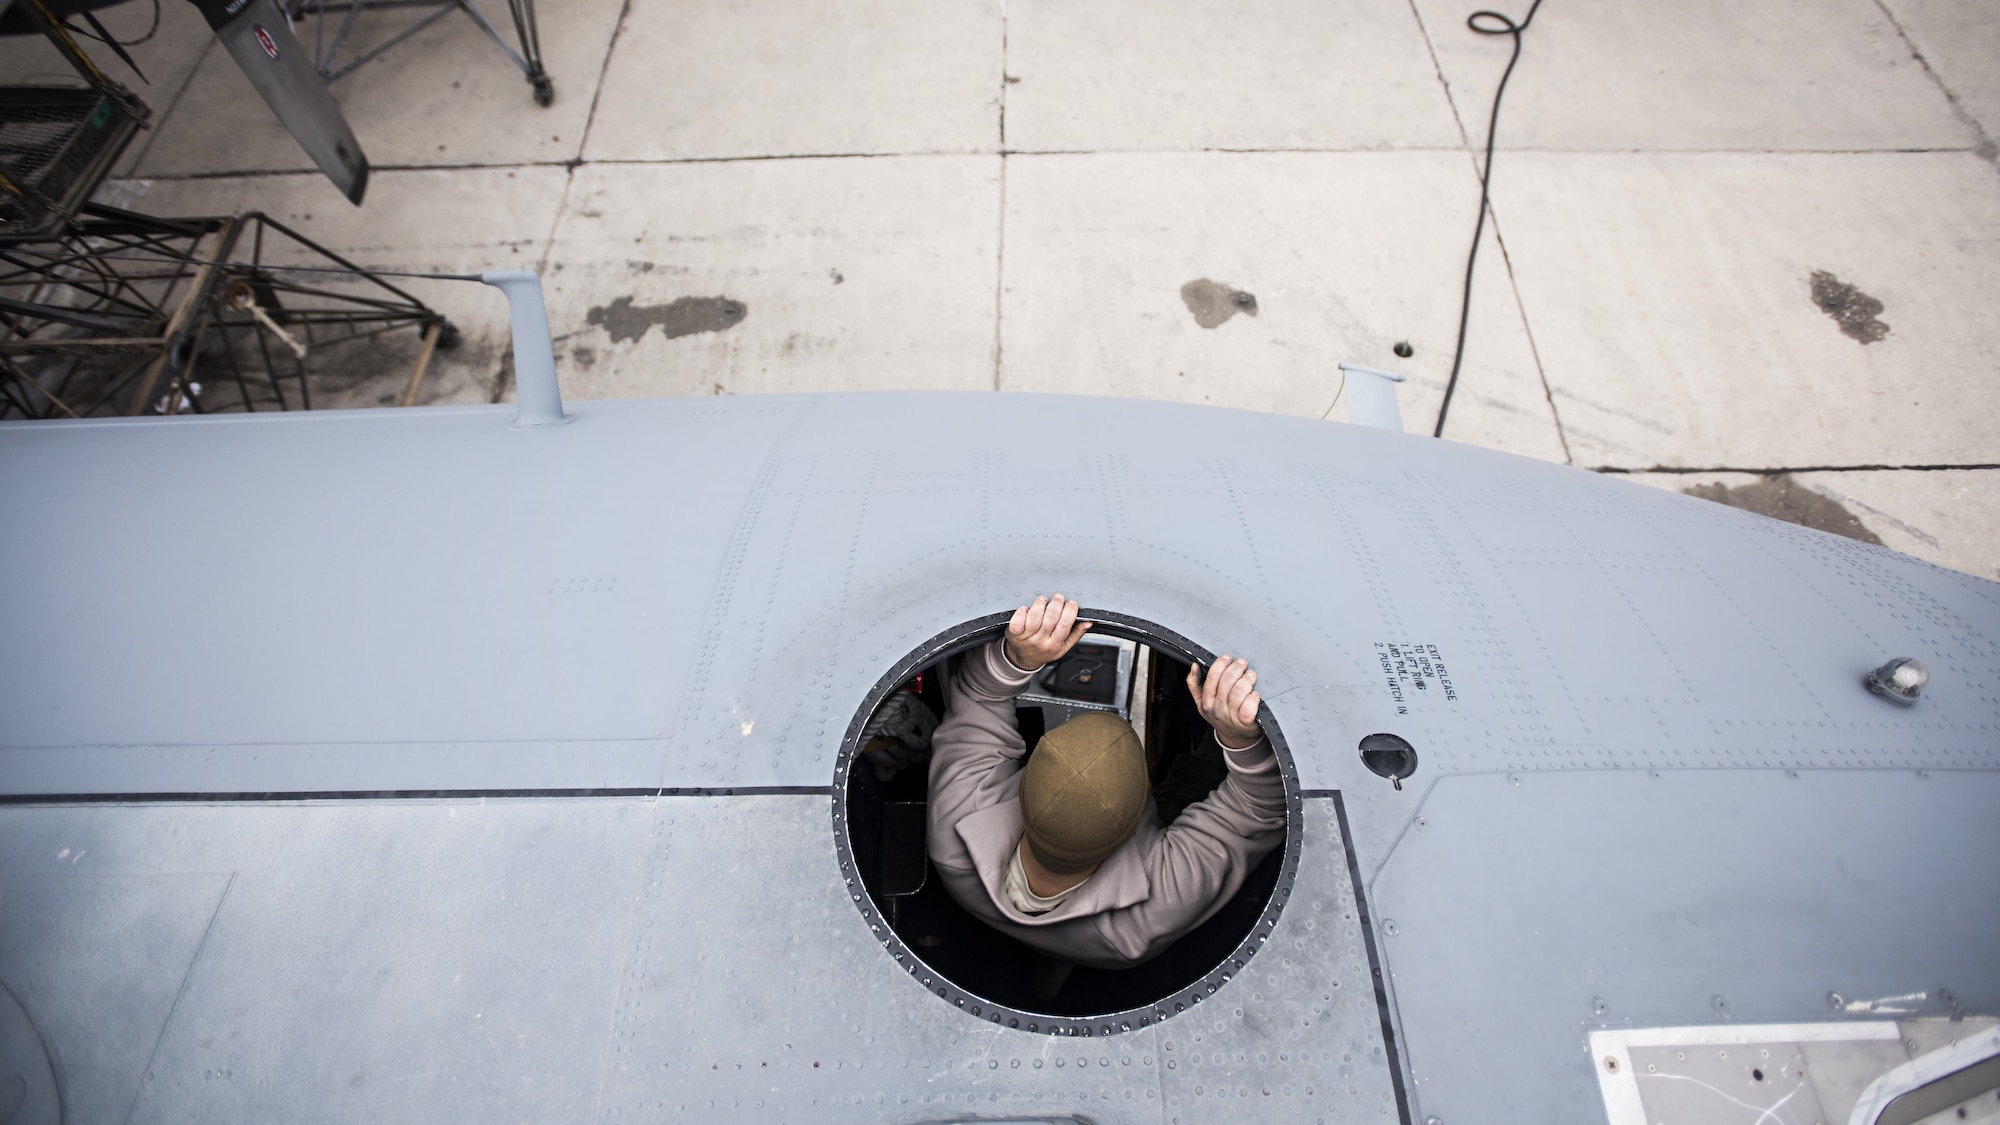 Staff Sgt. Sean Nelson, 455th Expeditionary Aircraft Maintenance Squadron crew chief, lowers himself off the roof of an EC-130 Compass Call Jan. 18, 2017 at Bagram Airfield, Afghanistan. The aircraft’s communications jamming capability is an indispensable asset to ground forces and has led to 2,193 terrorists removed from the battlefield, just since 2014. (U.S. Air Force photo by Staff Sgt. Katherine Spessa)